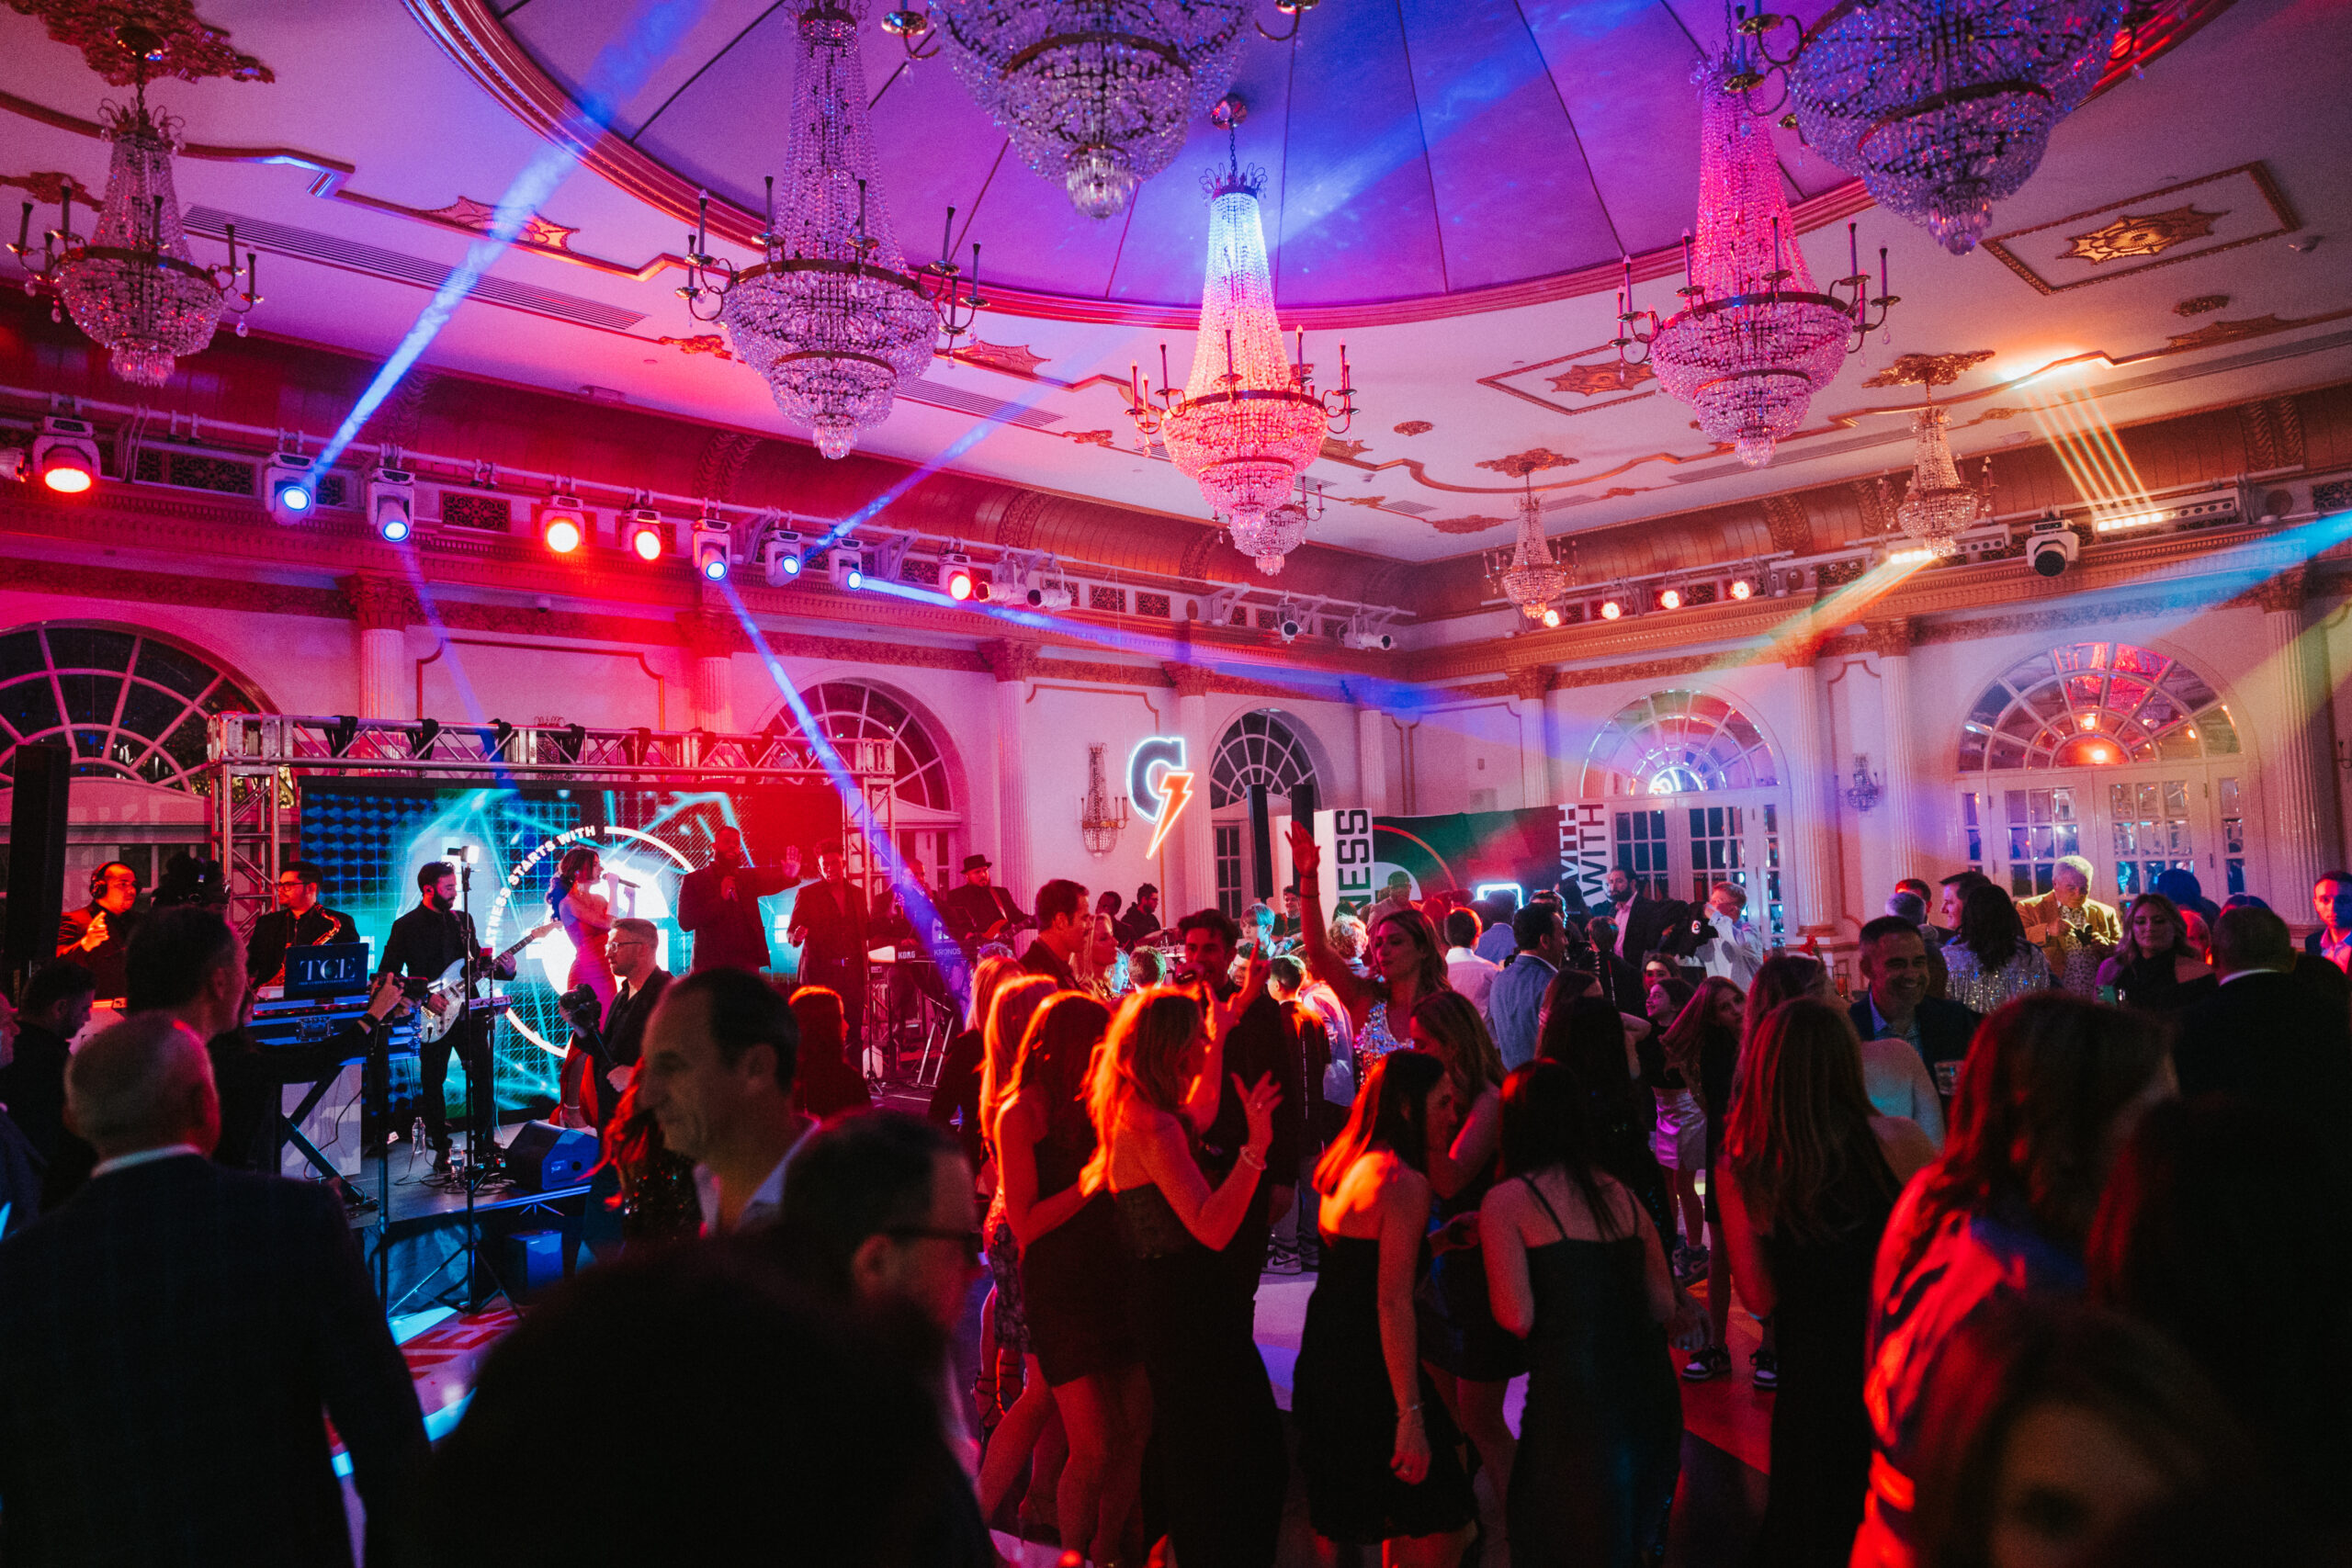 Guests dance to a live band in Crystal Plaza's Grand Ballroom.